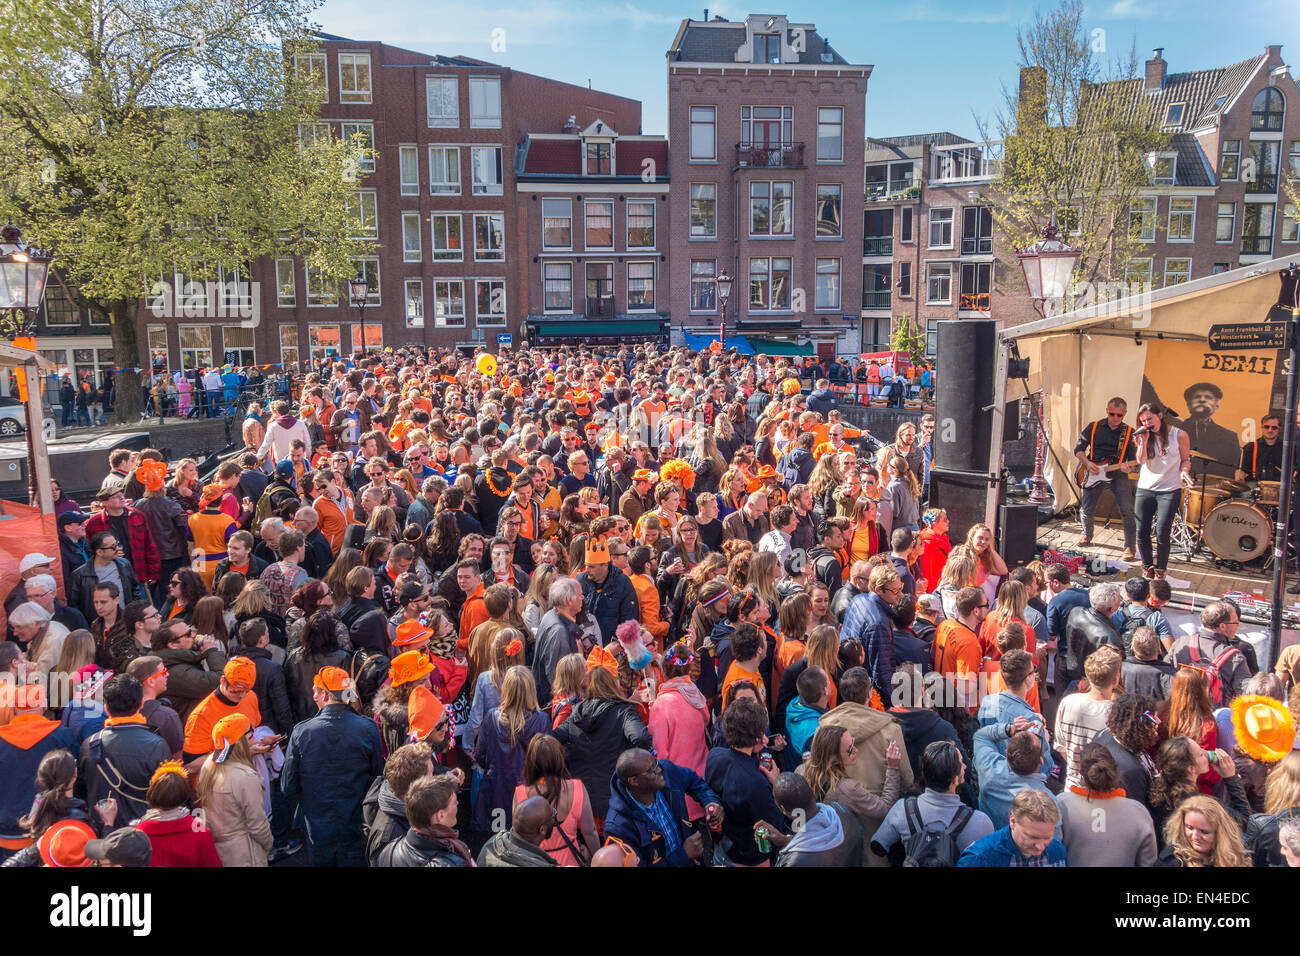 Crowds of people blocking a bridge when a band is performing on Koningsdag, Kings Day in Amsterdam on the Prinsengracht Canal Stock Photo